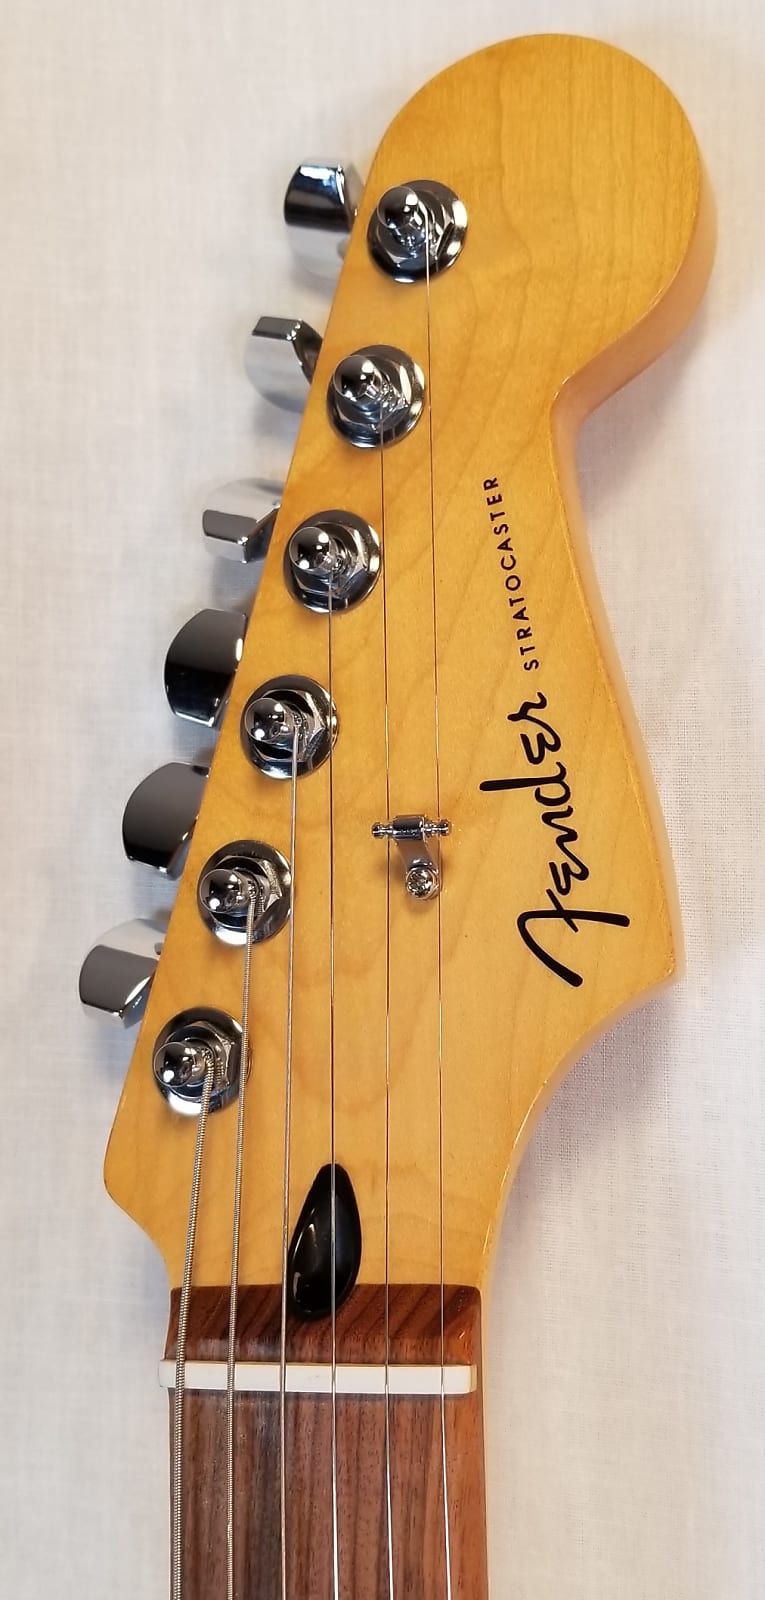 Player Plus Stratocaster headstock